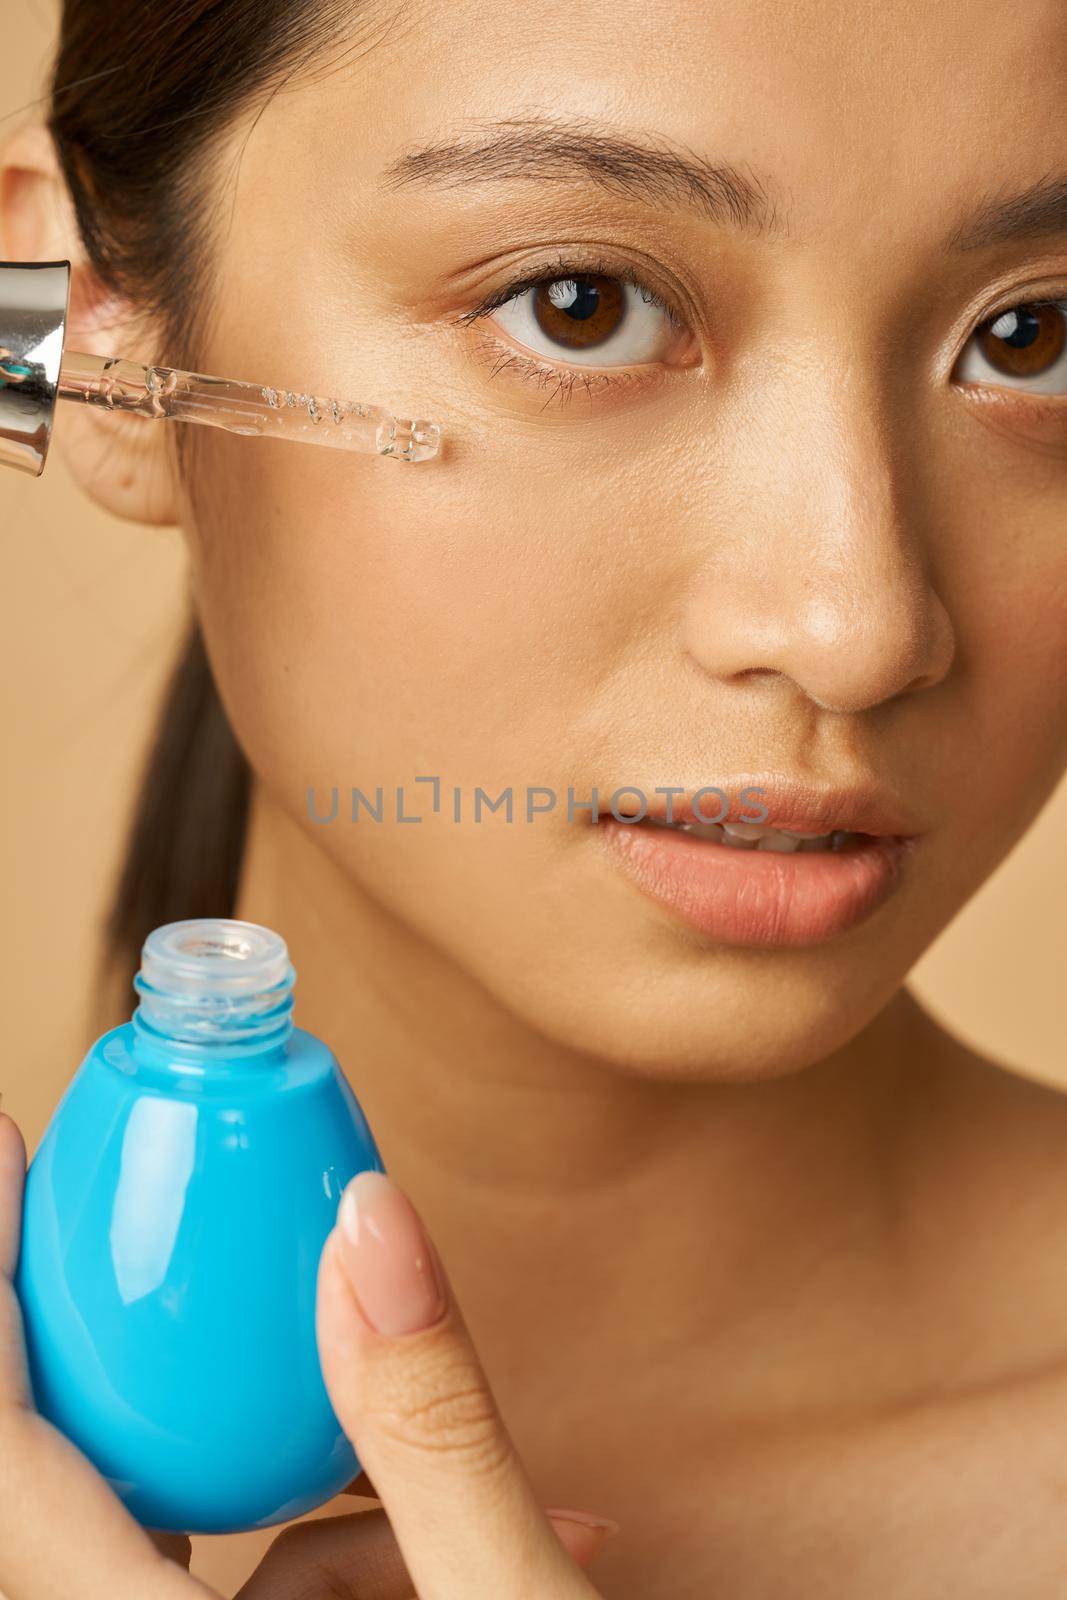 Face closeup of young woman looking at camera while applying oil drop serum, posing isolated over beige background. Beauty treatment concept